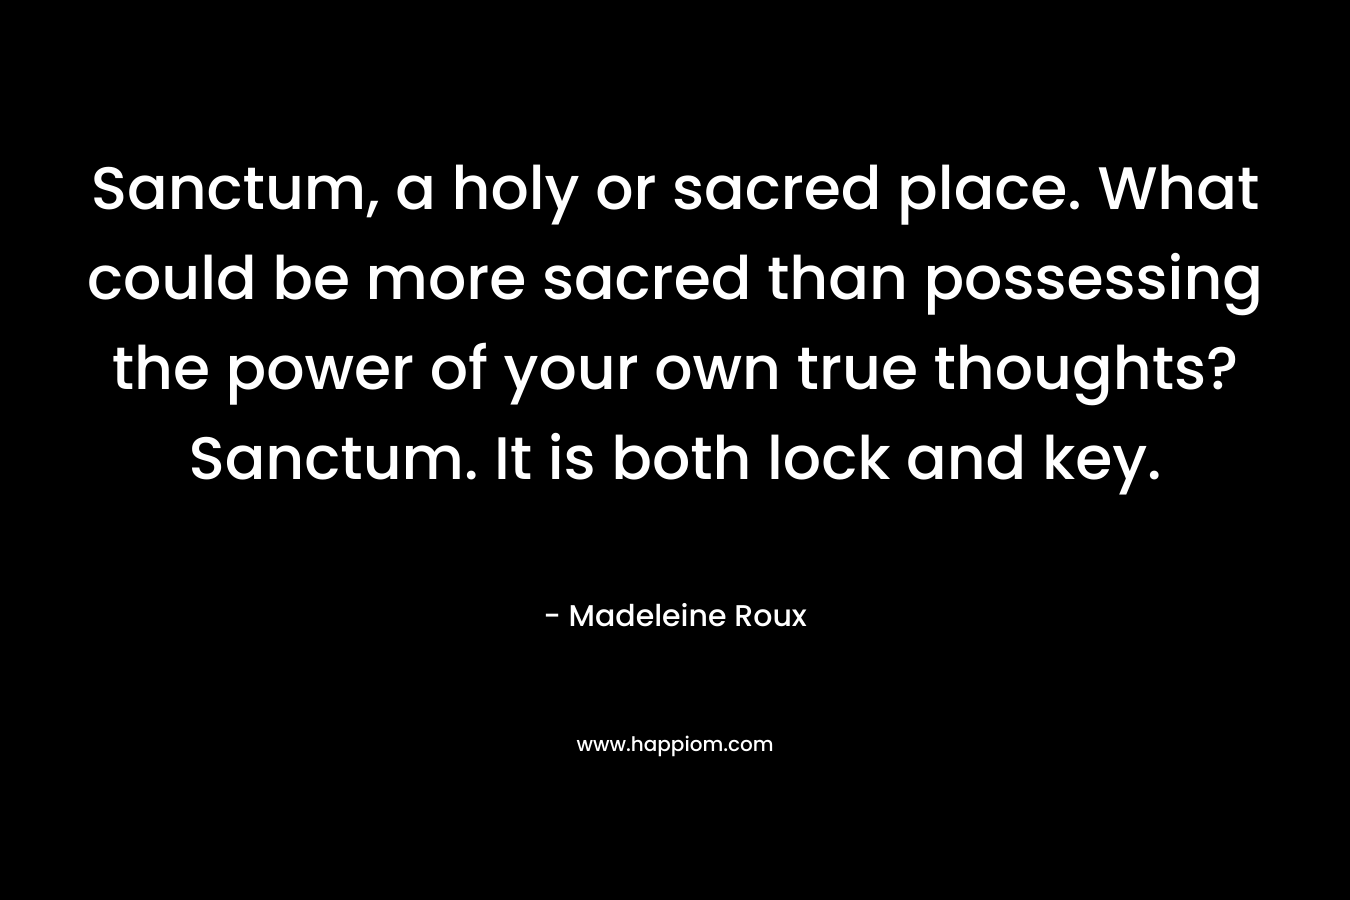 Sanctum, a holy or sacred place. What could be more sacred than possessing the power of your own true thoughts? Sanctum. It is both lock and key.